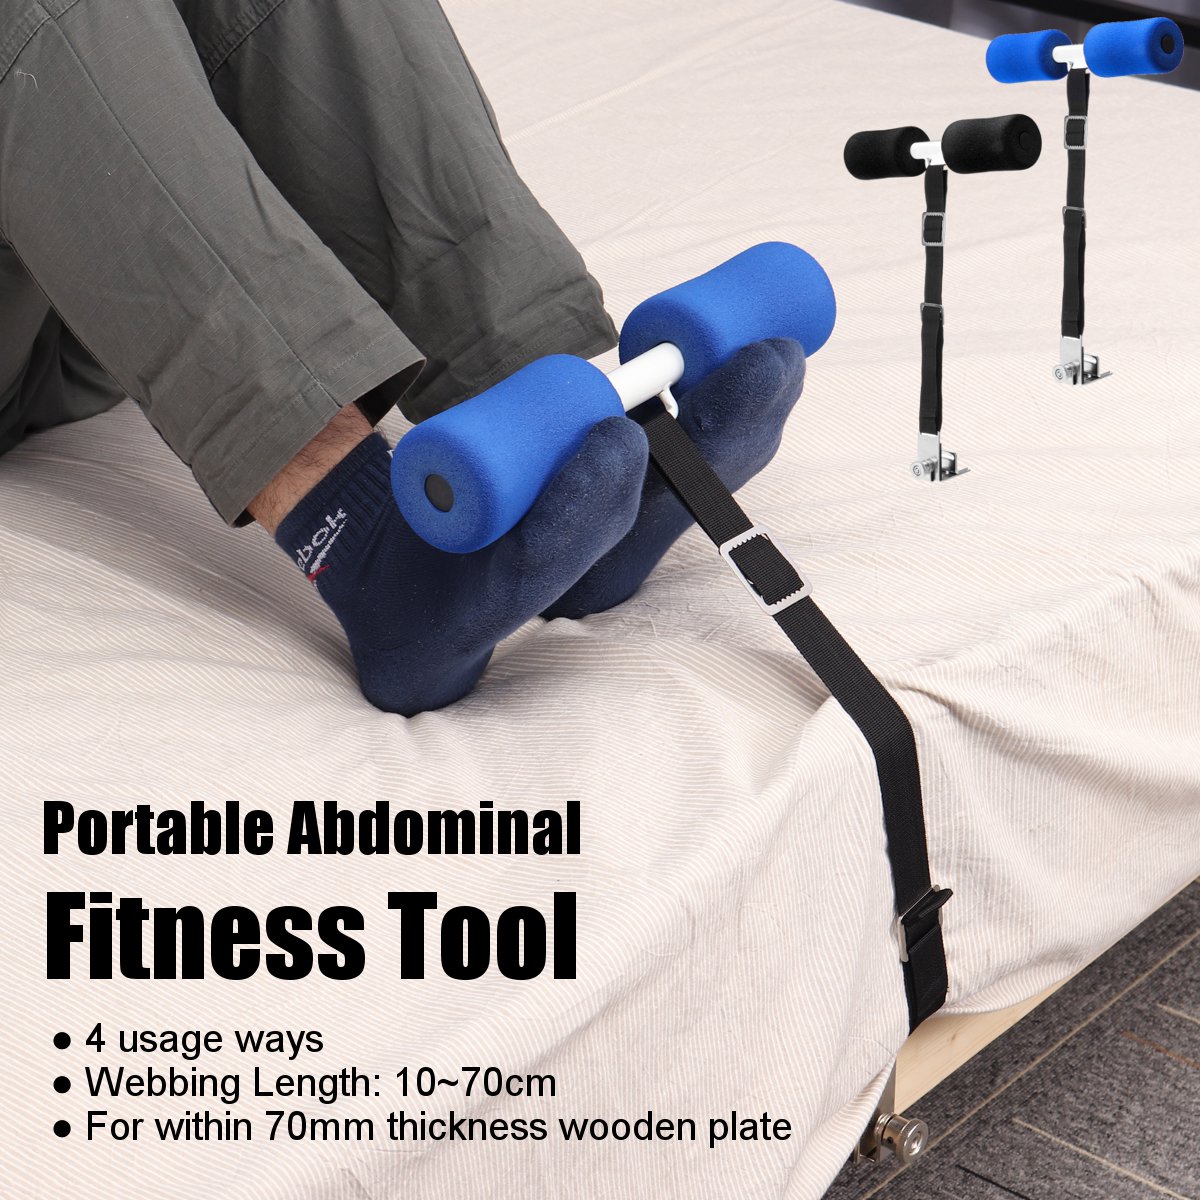 Adjustable-Sit-Ups-Abdominal-Wheel-Roller-Push-up-Home-Fitness-Sports-Exercise-Tools-1663894-1